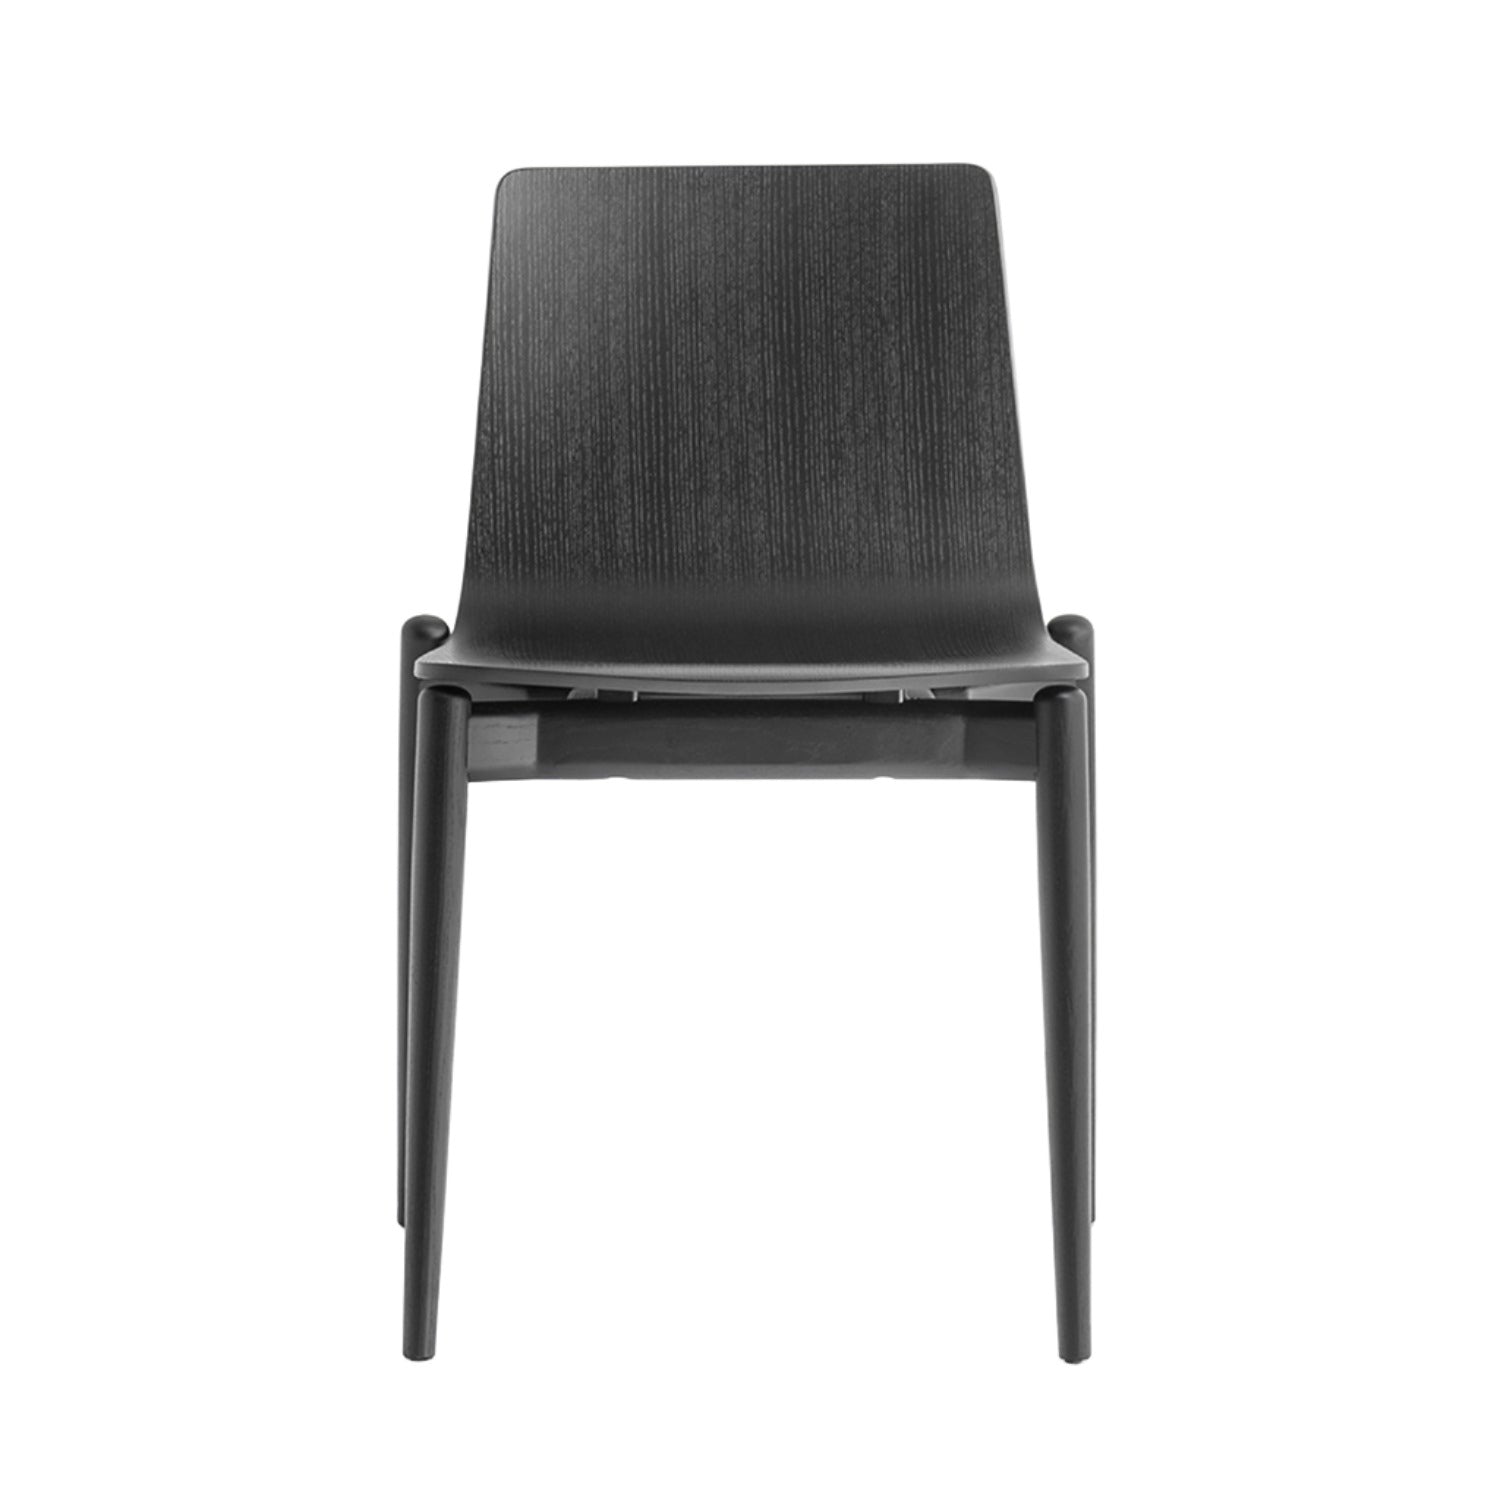 Pedrali Malmo 390 Dining Chair in black